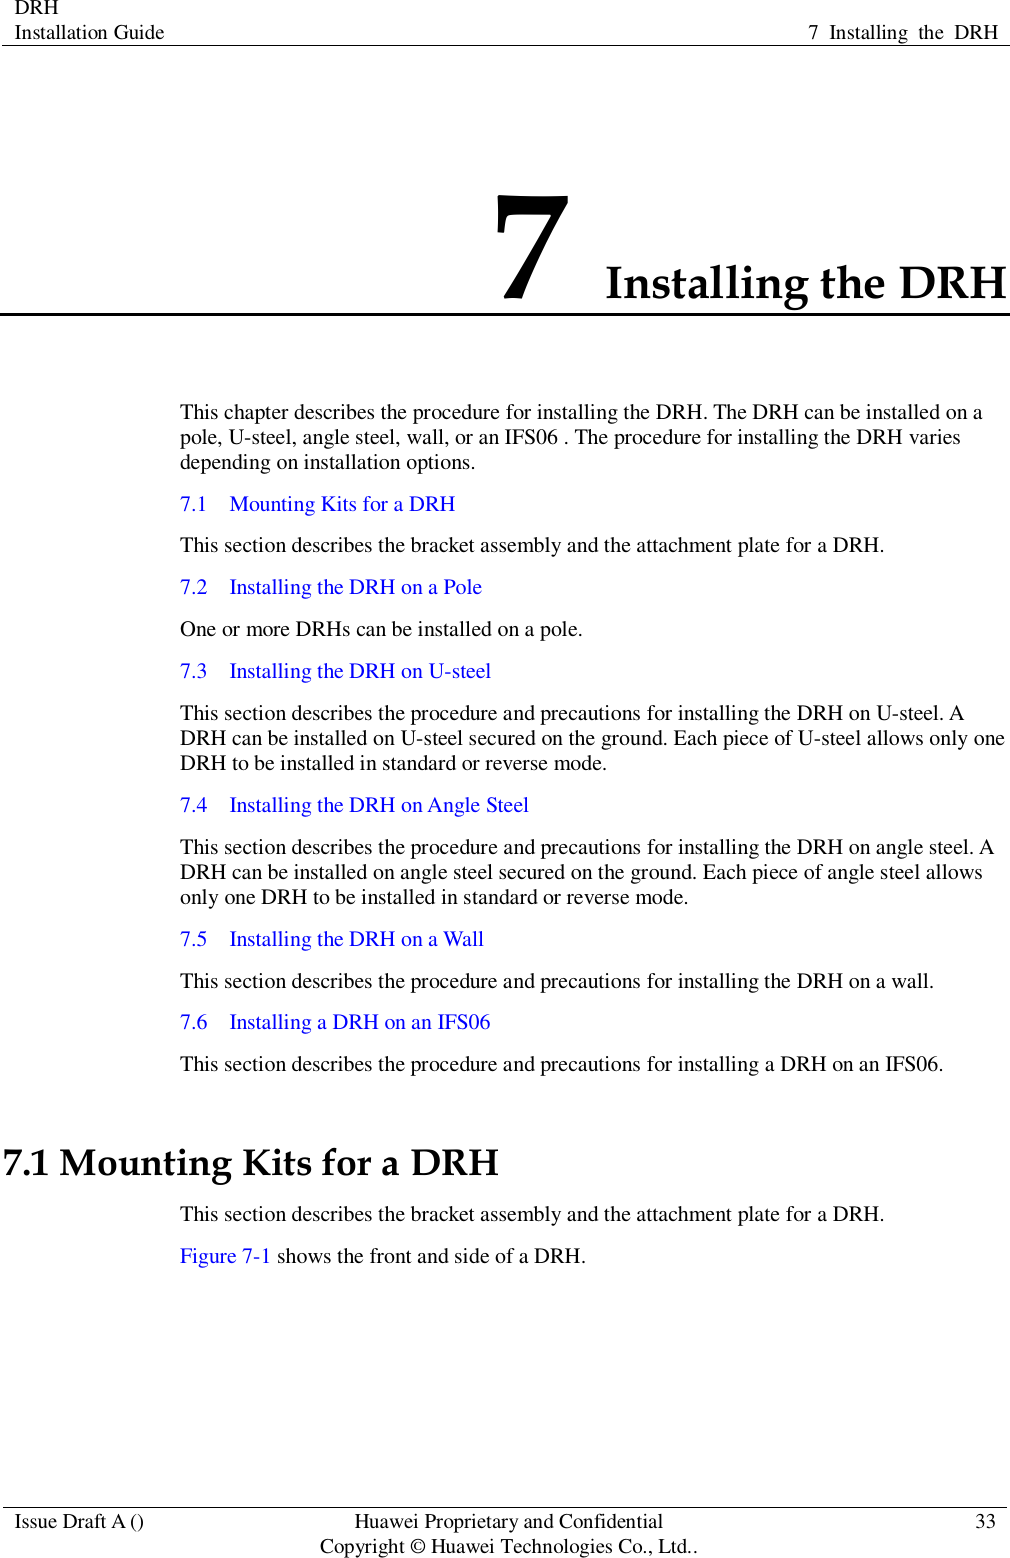 DRH   Installation Guide 7  Installing  the  DRH  Issue Draft A () Huawei Proprietary and Confidential                                     Copyright © Huawei Technologies Co., Ltd.. 33  7 Installing the DRH This chapter describes the procedure for installing the DRH. The DRH can be installed on a pole, U-steel, angle steel, wall, or an IFS06 . The procedure for installing the DRH varies depending on installation options. 7.1    Mounting Kits for a DRH This section describes the bracket assembly and the attachment plate for a DRH. 7.2    Installing the DRH on a Pole One or more DRHs can be installed on a pole. 7.3    Installing the DRH on U-steel This section describes the procedure and precautions for installing the DRH on U-steel. A DRH can be installed on U-steel secured on the ground. Each piece of U-steel allows only one DRH to be installed in standard or reverse mode. 7.4    Installing the DRH on Angle Steel This section describes the procedure and precautions for installing the DRH on angle steel. A DRH can be installed on angle steel secured on the ground. Each piece of angle steel allows only one DRH to be installed in standard or reverse mode. 7.5    Installing the DRH on a Wall This section describes the procedure and precautions for installing the DRH on a wall. 7.6    Installing a DRH on an IFS06 This section describes the procedure and precautions for installing a DRH on an IFS06. 7.1 Mounting Kits for a DRH This section describes the bracket assembly and the attachment plate for a DRH. Figure 7-1 shows the front and side of a DRH. 